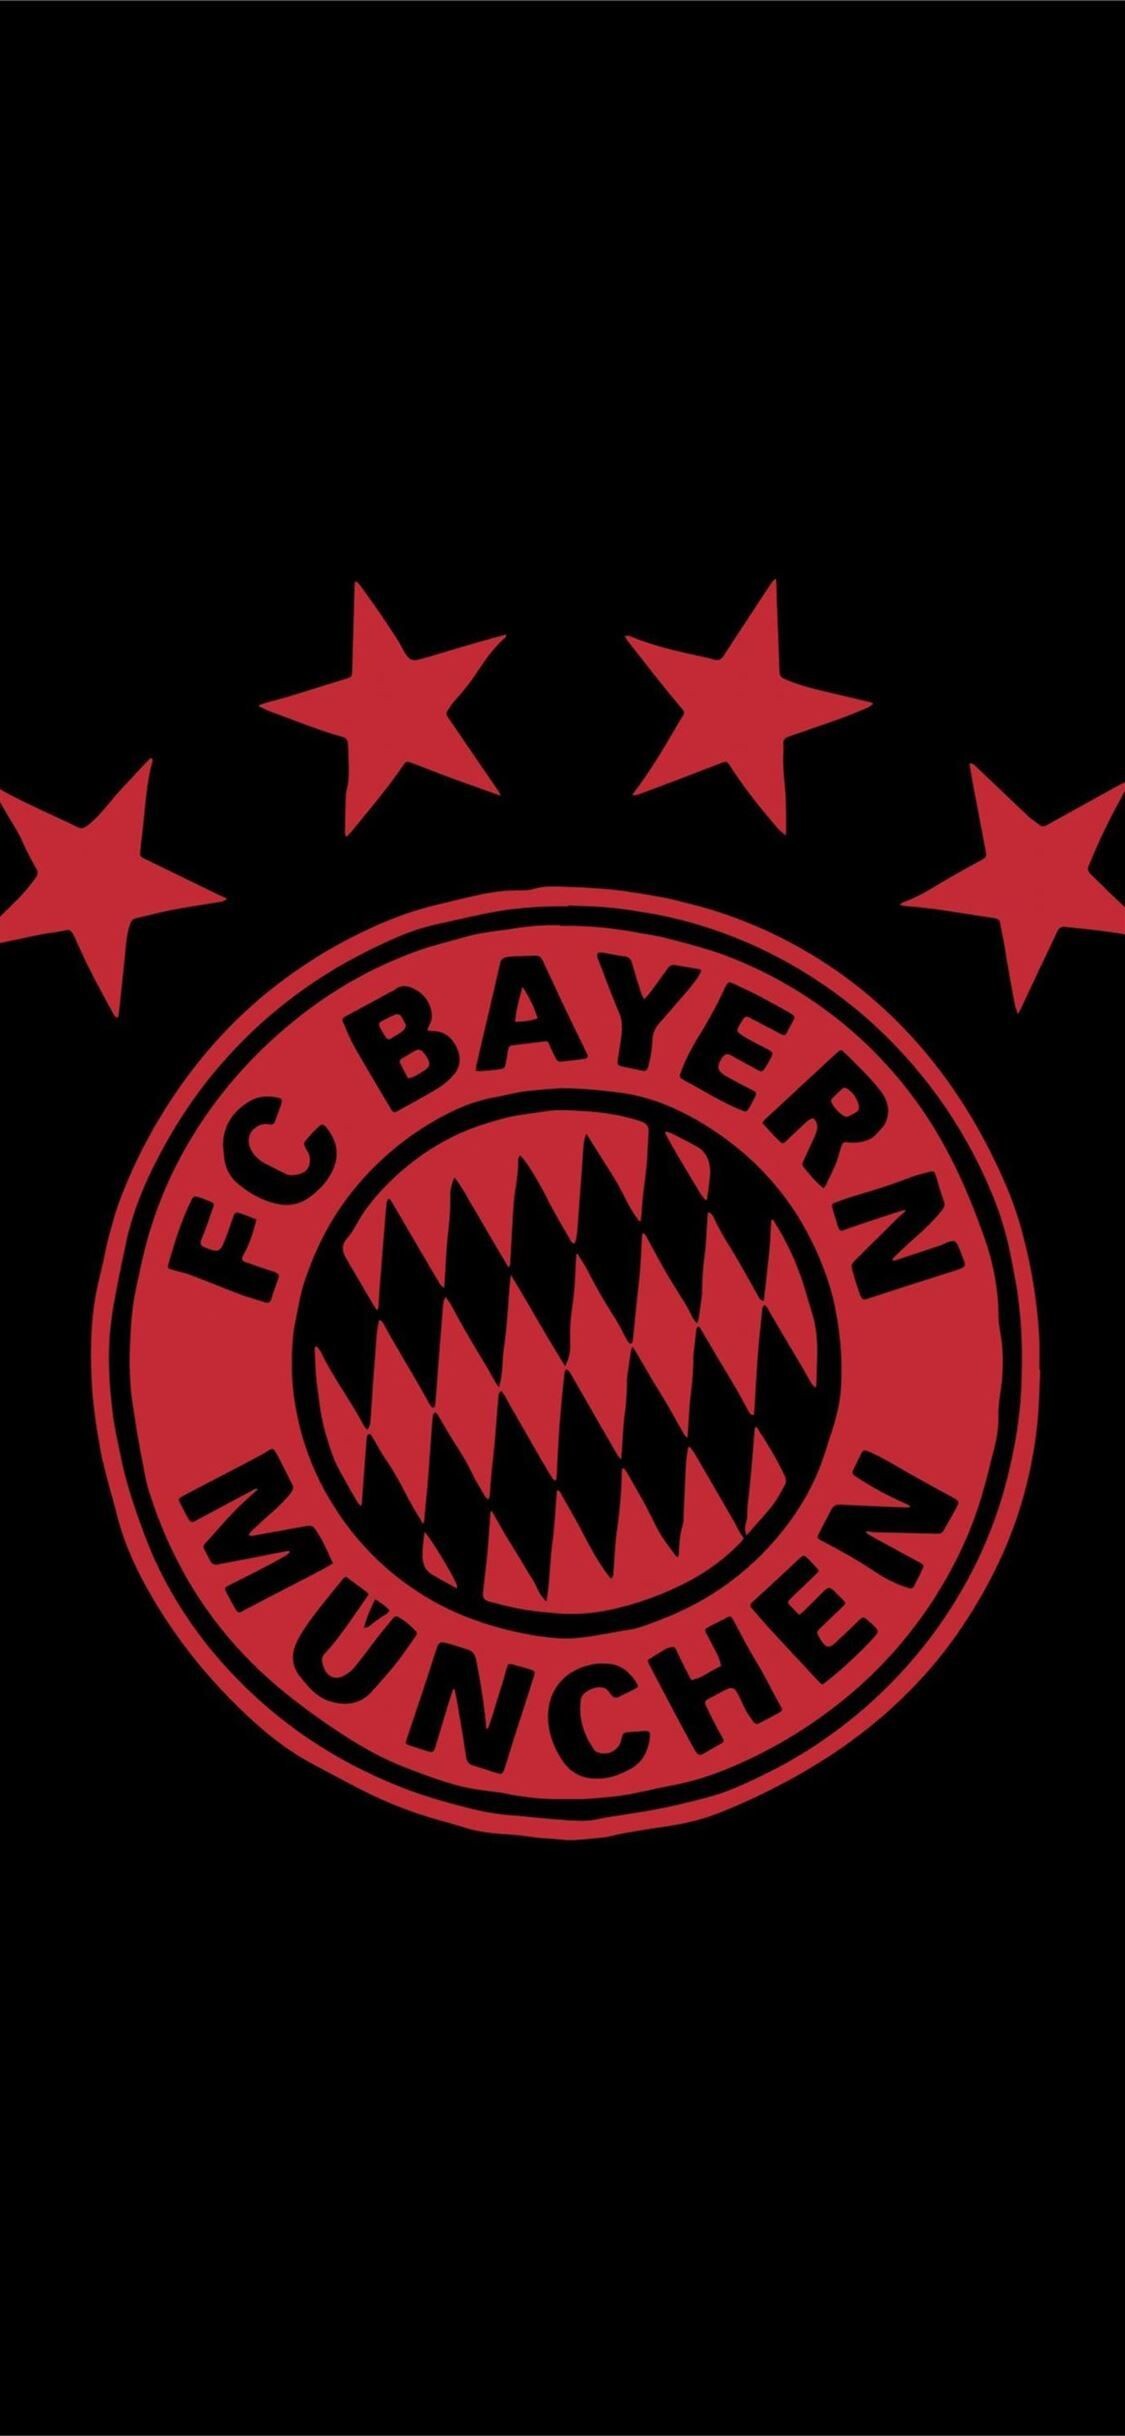 Germany Soccer Team: FC Bayern Munich, A record 32 national titles, 20 national cups, and numerous European honors winners. 1130x2440 HD Background.